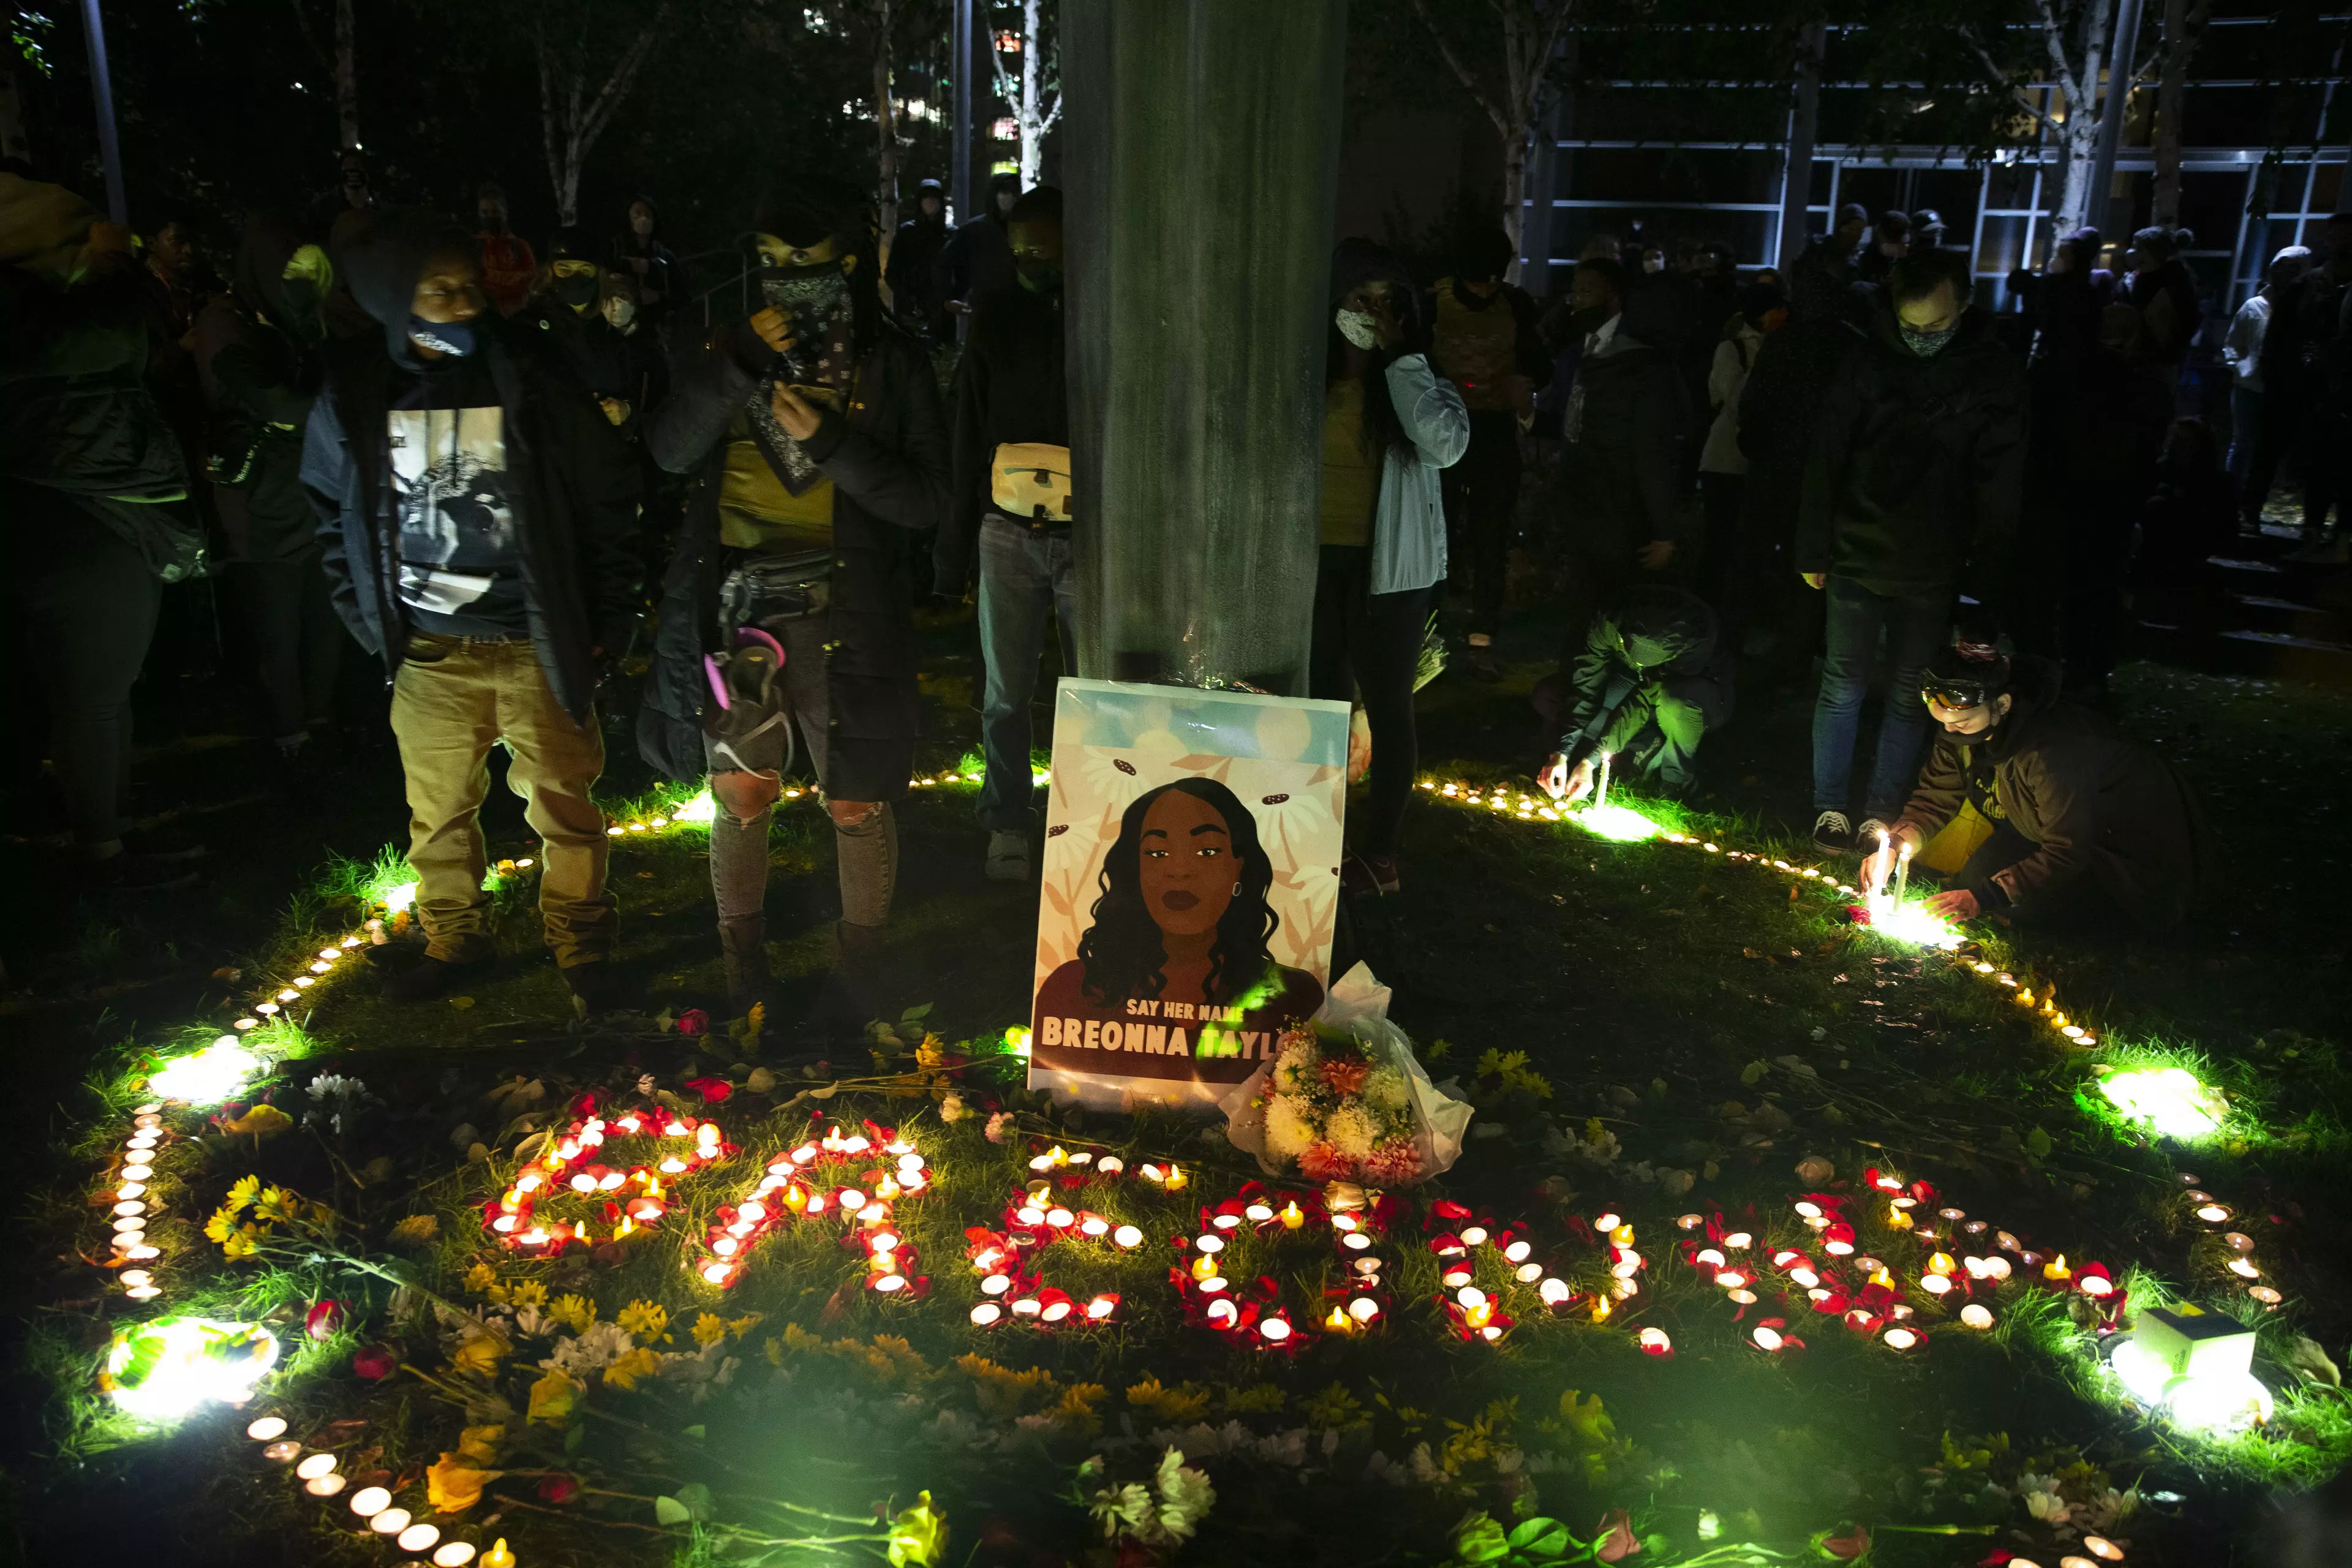 Breonna Taylor's death was one of the spurring influences behind the Black Lives Matter movement (